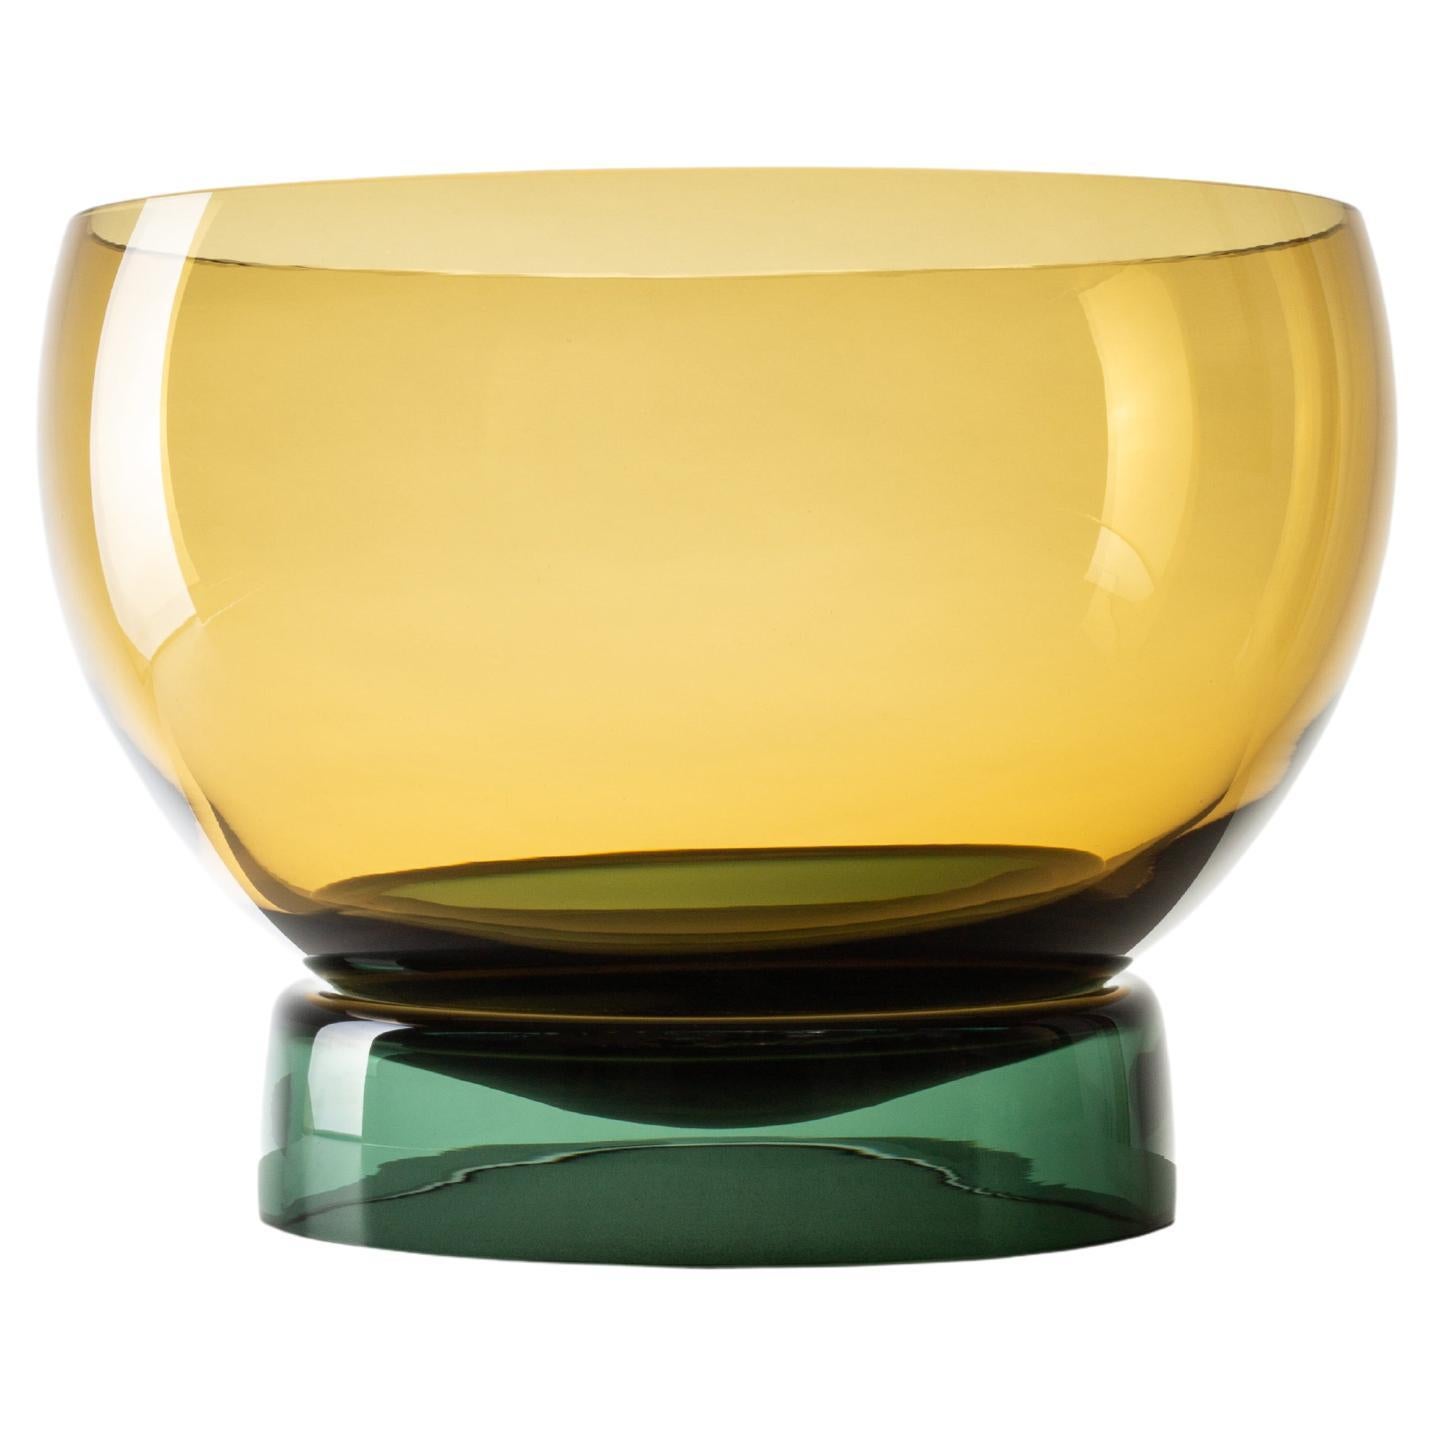 Small Olivin View Bowl by SkLO